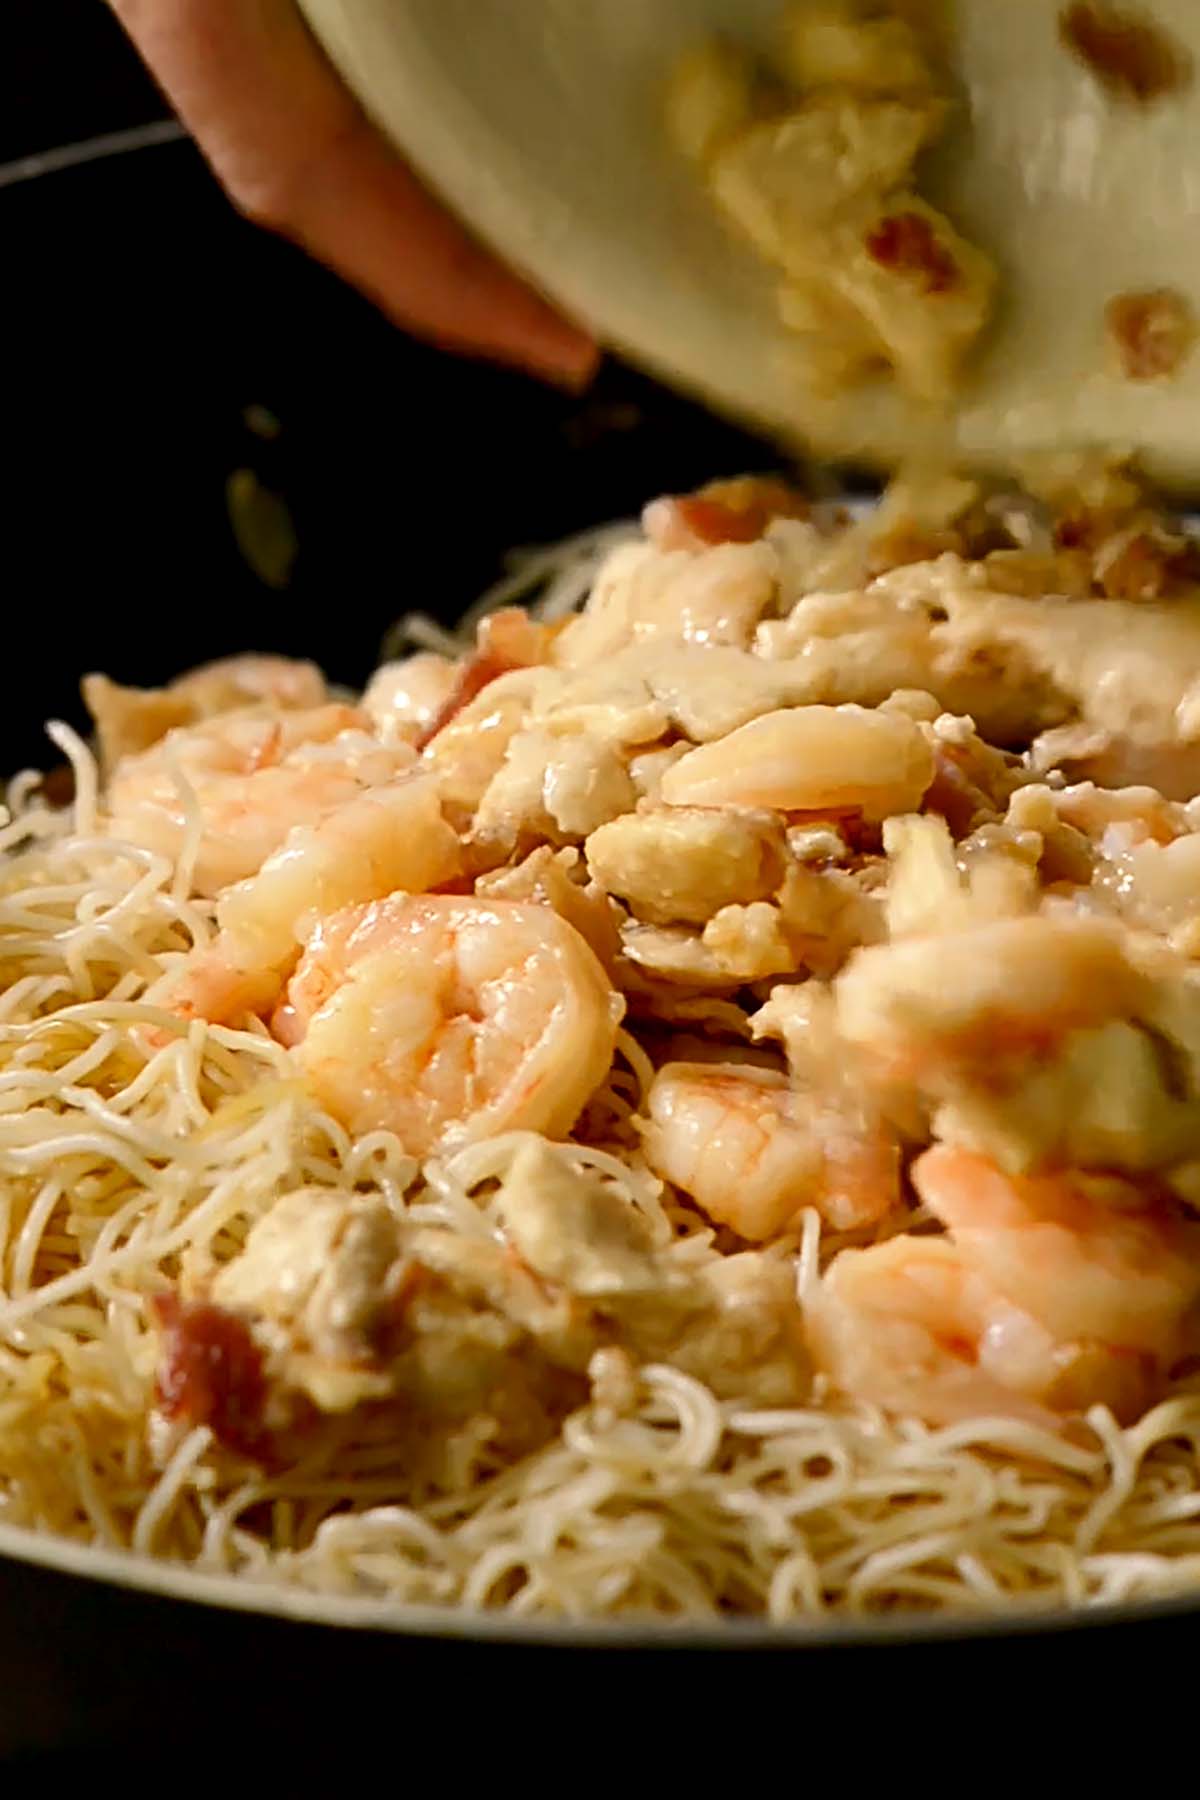 Cooked chicken, shrimp, and bacon added to vermicelli in a large wok.